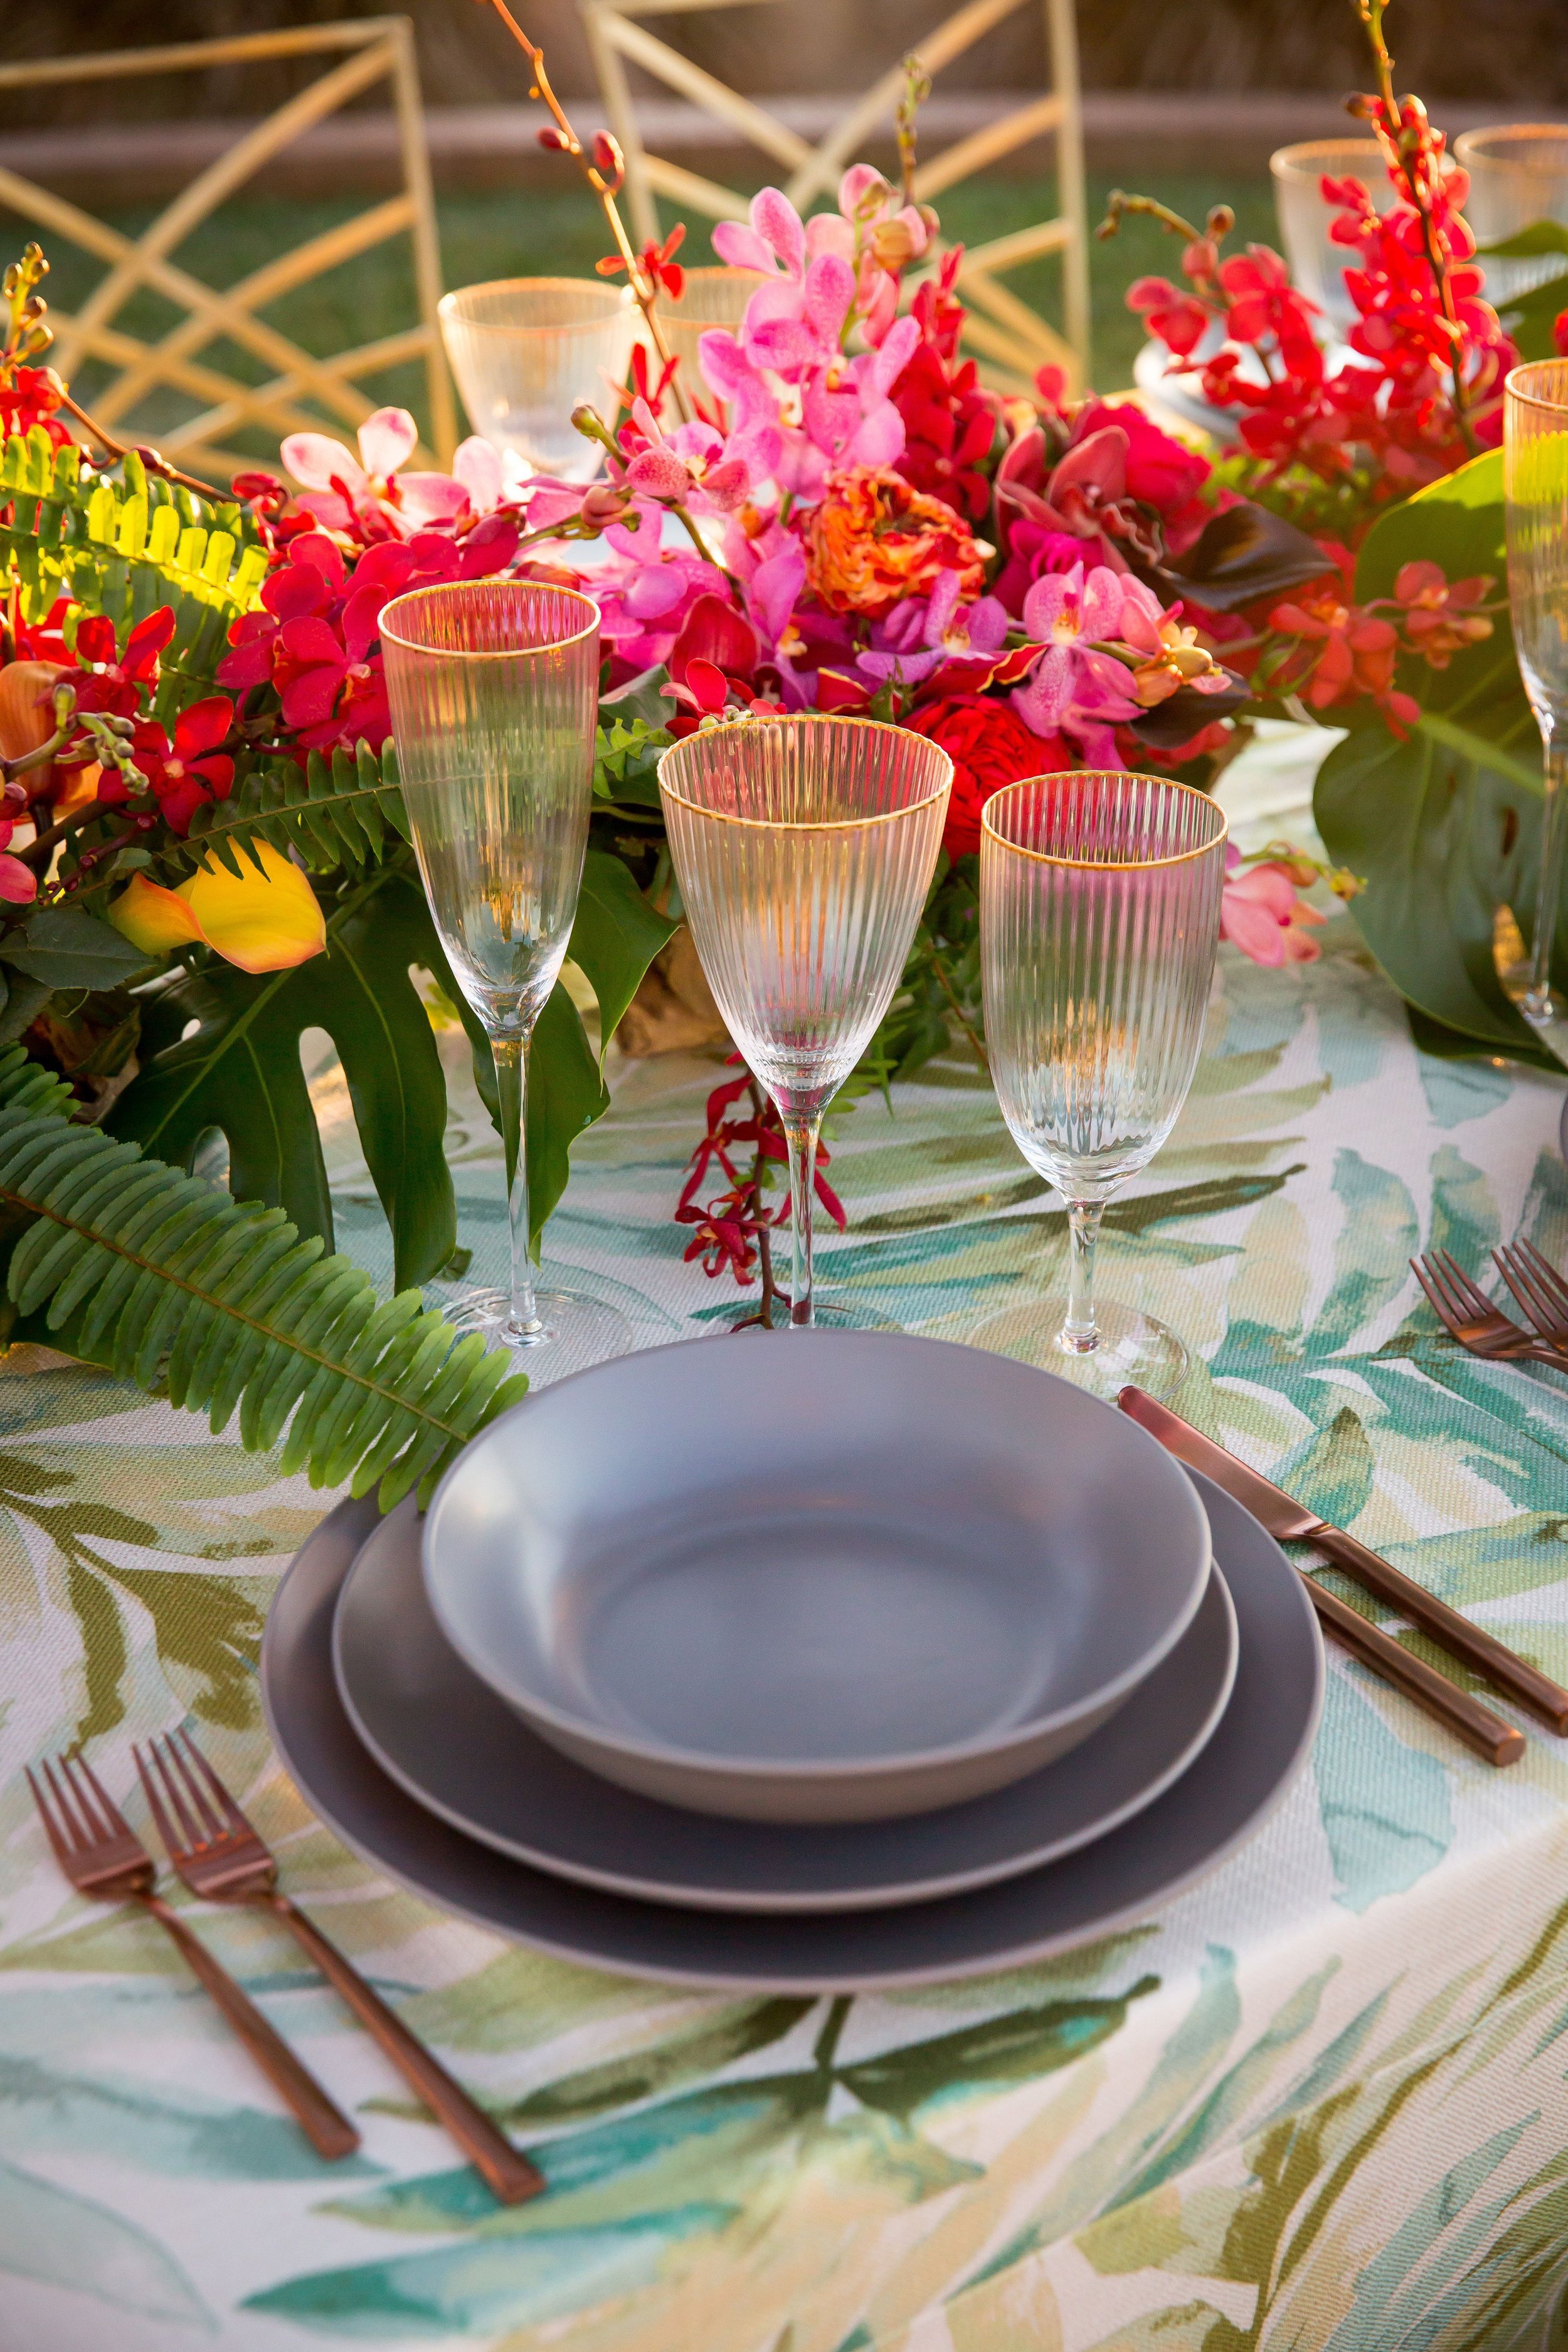 www.santabarbarawedding.com | Bright Event Rentals | Vanity Portrait Studio | Place Setting with Grey Plates and a Bowl, Gold Rimmed Glasses, and Colorful Florals All on a Floral Tablecloth